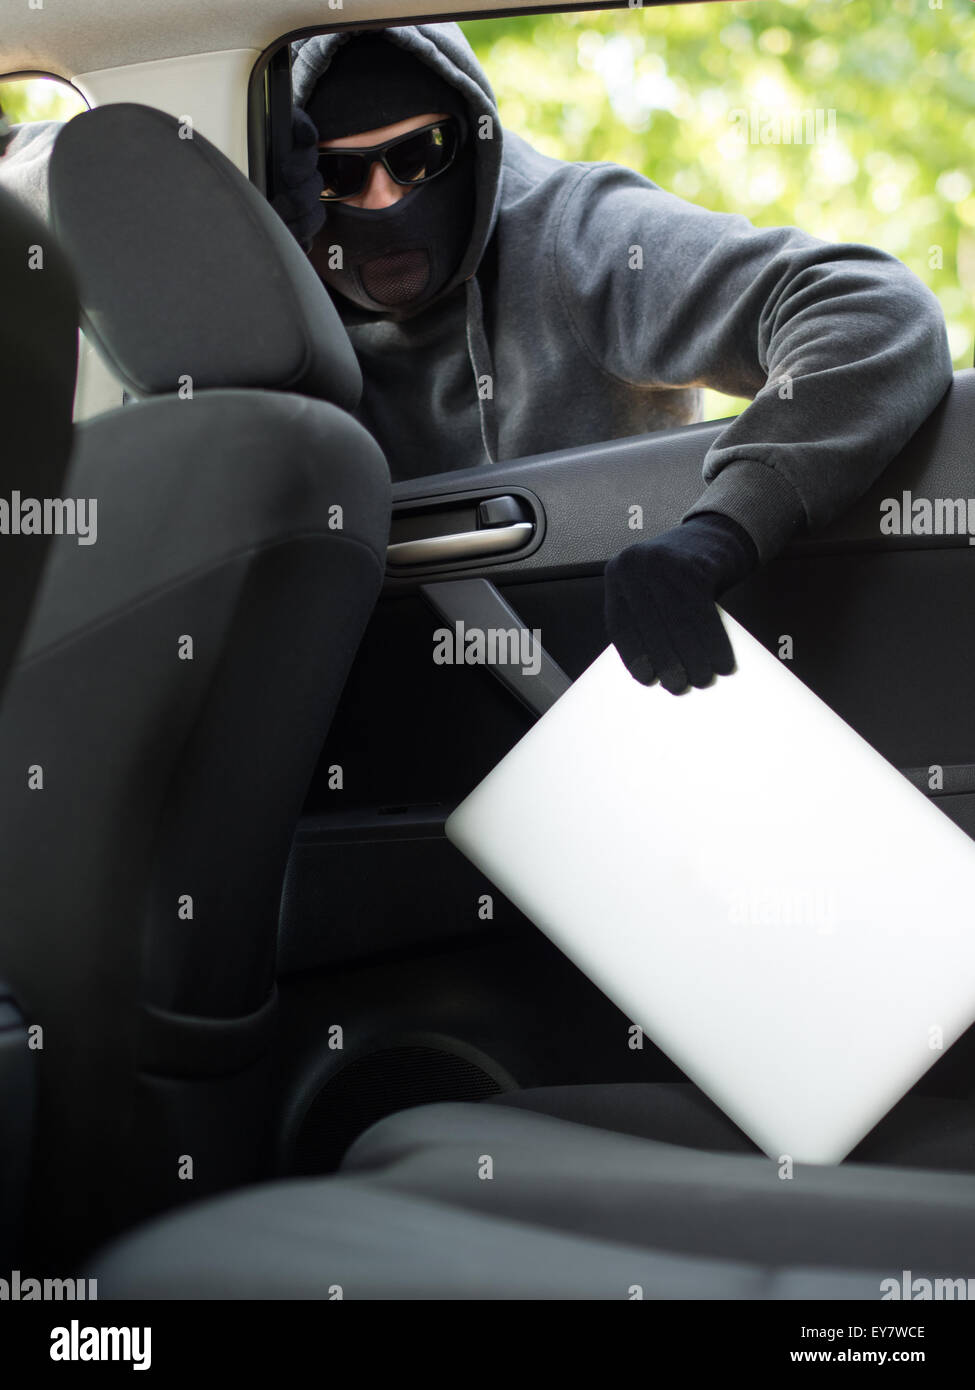 Car theft - a laptop being stolen through the window of an unoccupied car. Stock Photo